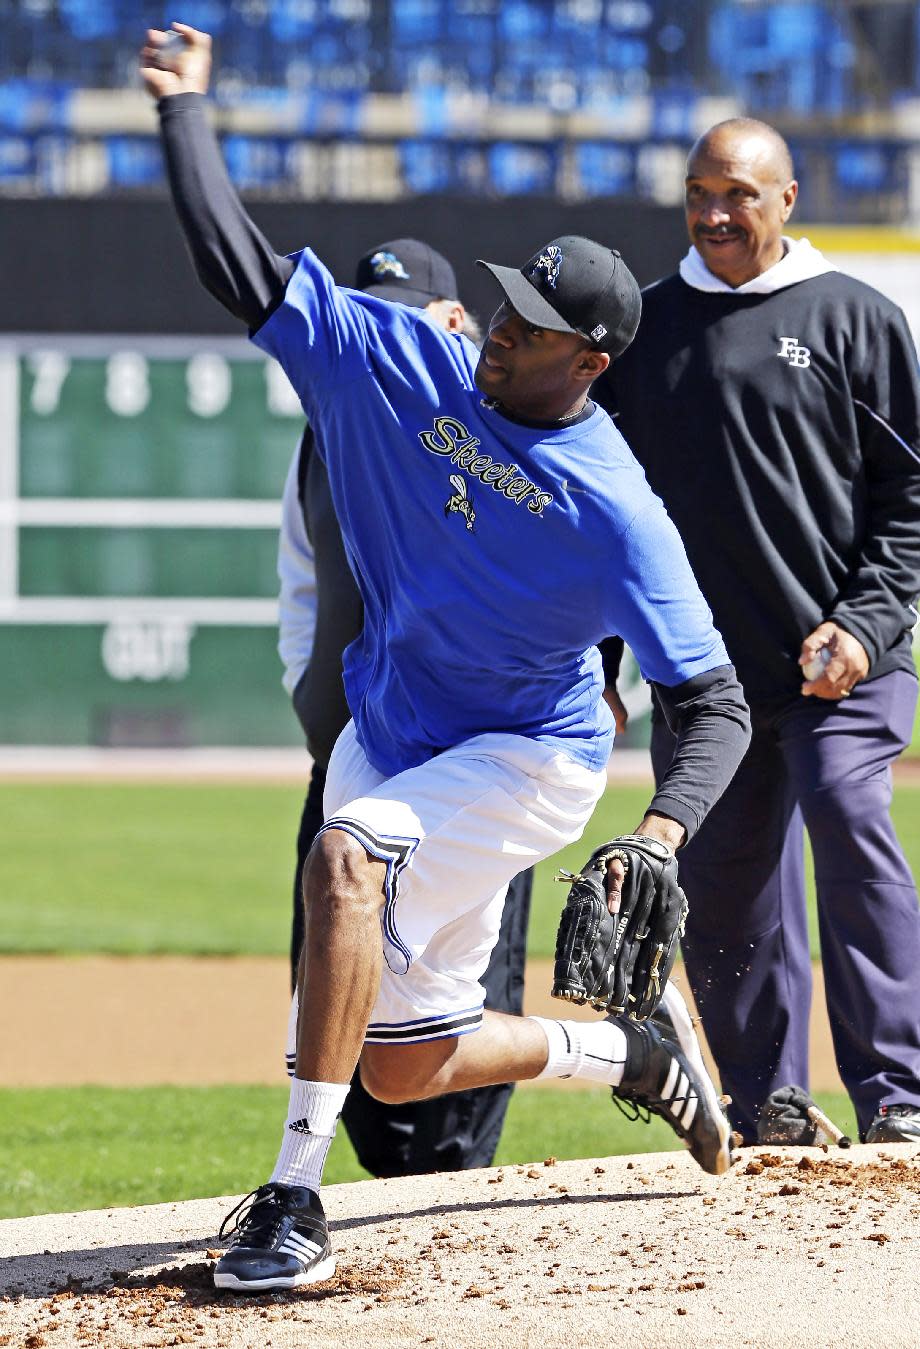 Retired NBA All-Star Tracy McGrady delivers a pitch at the Sugar Land Skeeters baseball stadium as former major league pitcher Scipio Spinks, right, stands near Wednesday, Feb. 12, 2014, in Sugar Land, Texas. McGrady hopes to tryout for the independent Atlantic League Skeeters. (AP Photo/Pat Sullivan)